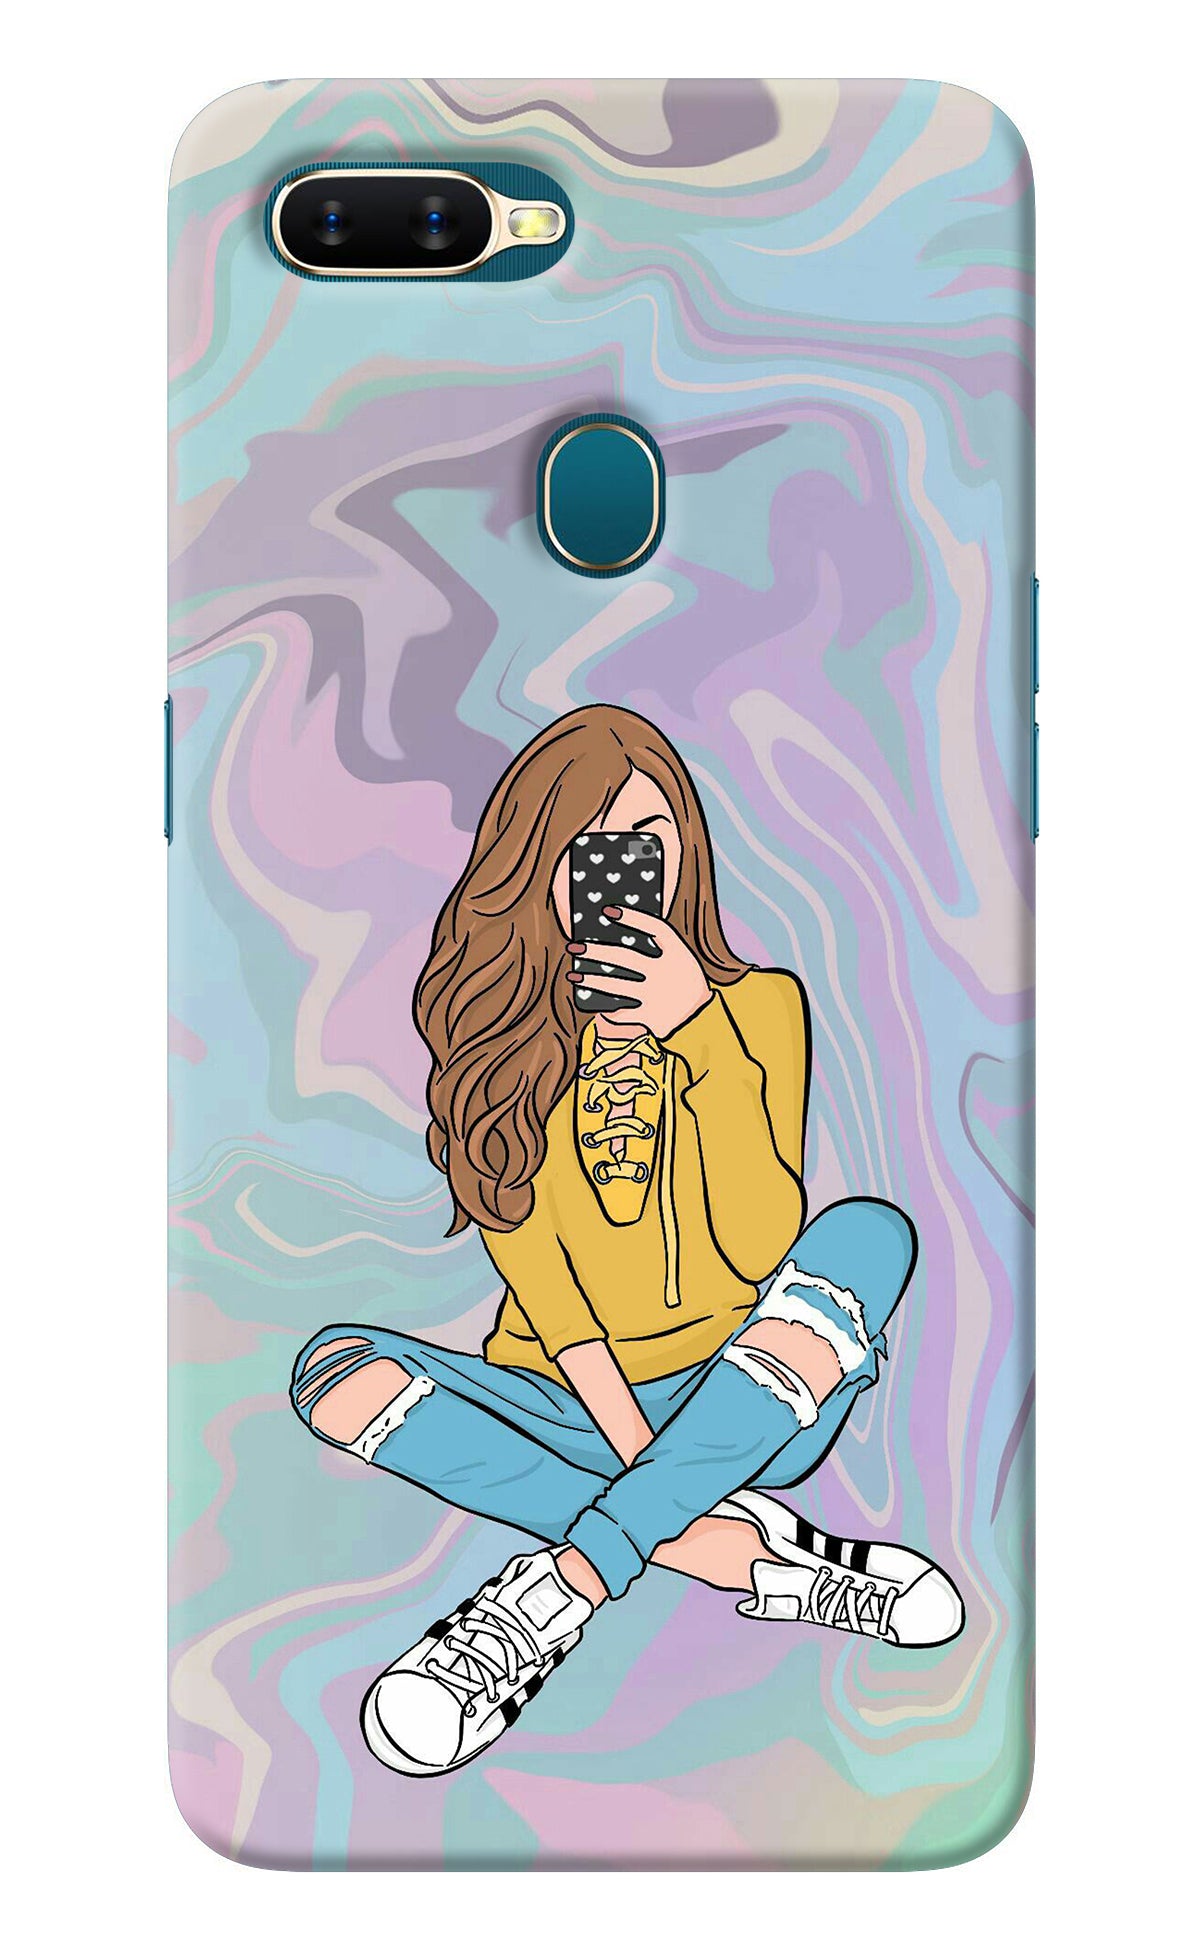 Selfie Girl Oppo A7/A5s/A12 Back Cover